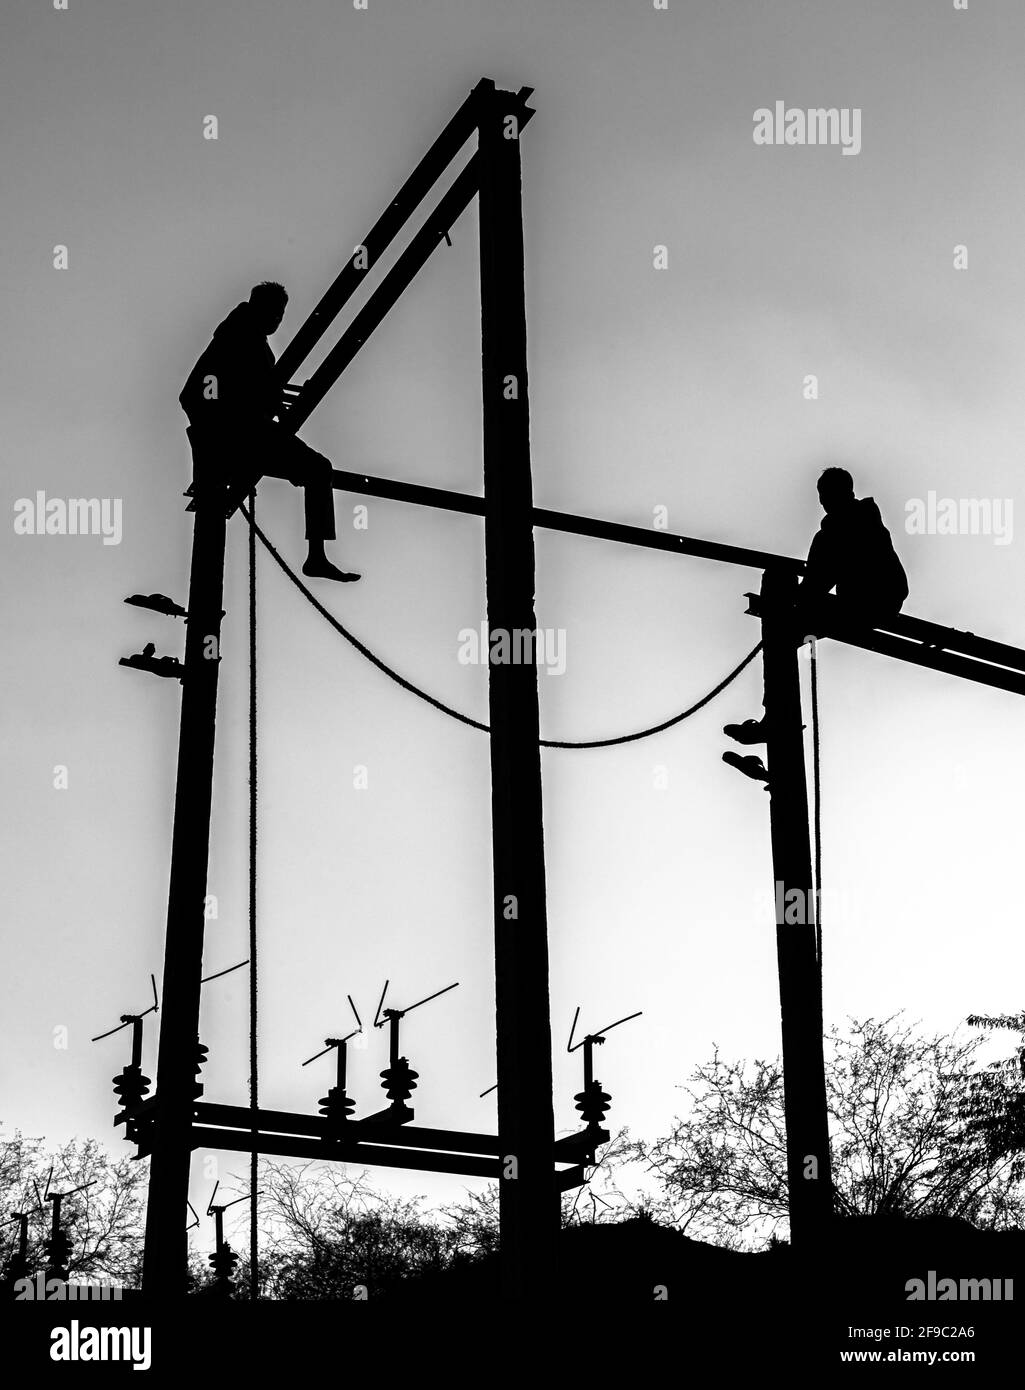 black and white silhouette of a two man sitting on electric pole. Stock Photo